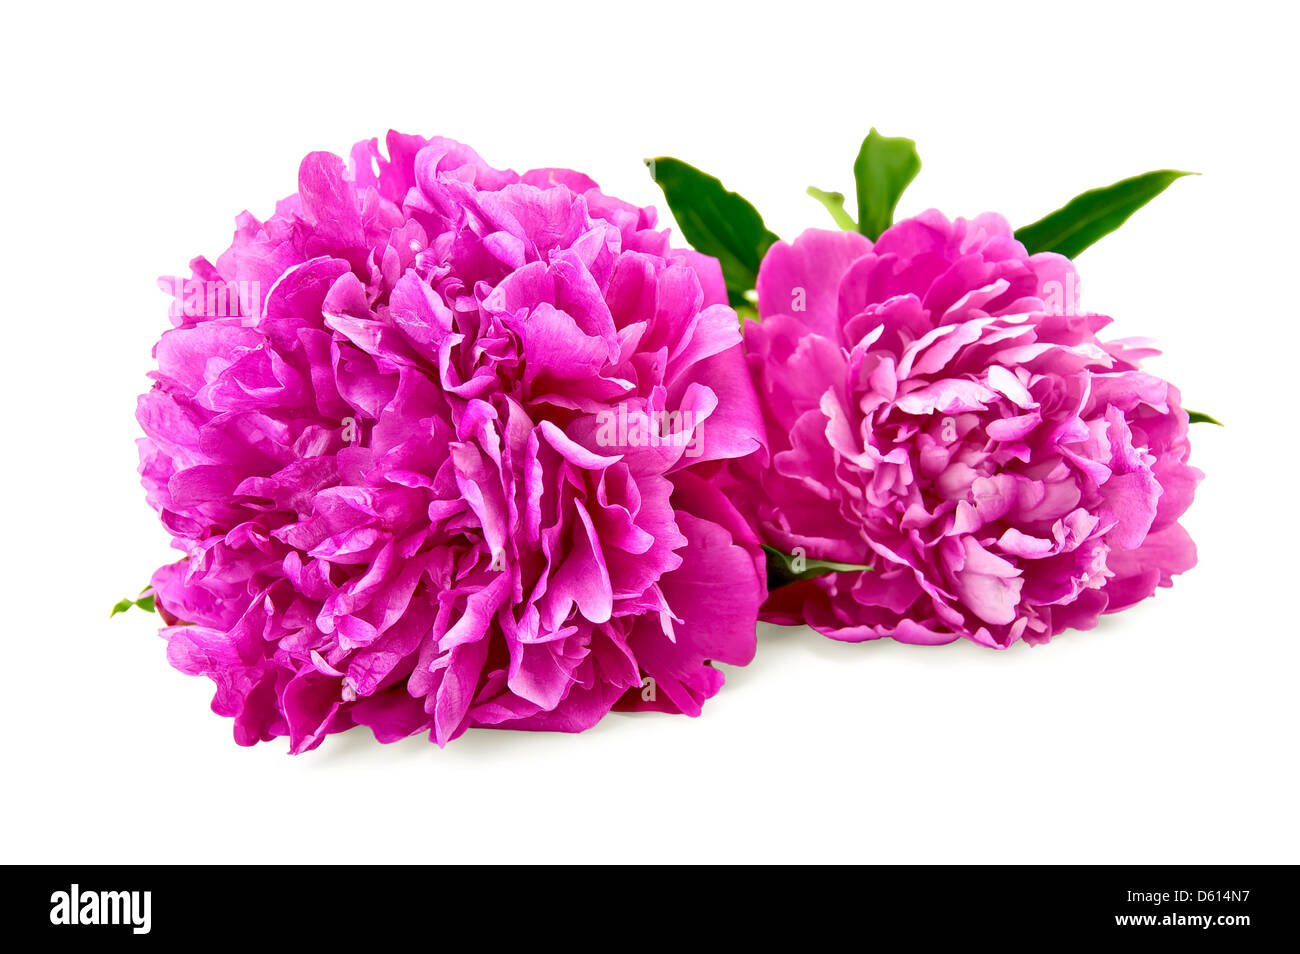 Two bright pink peonies with green leaf isolated on white background Stock Photo